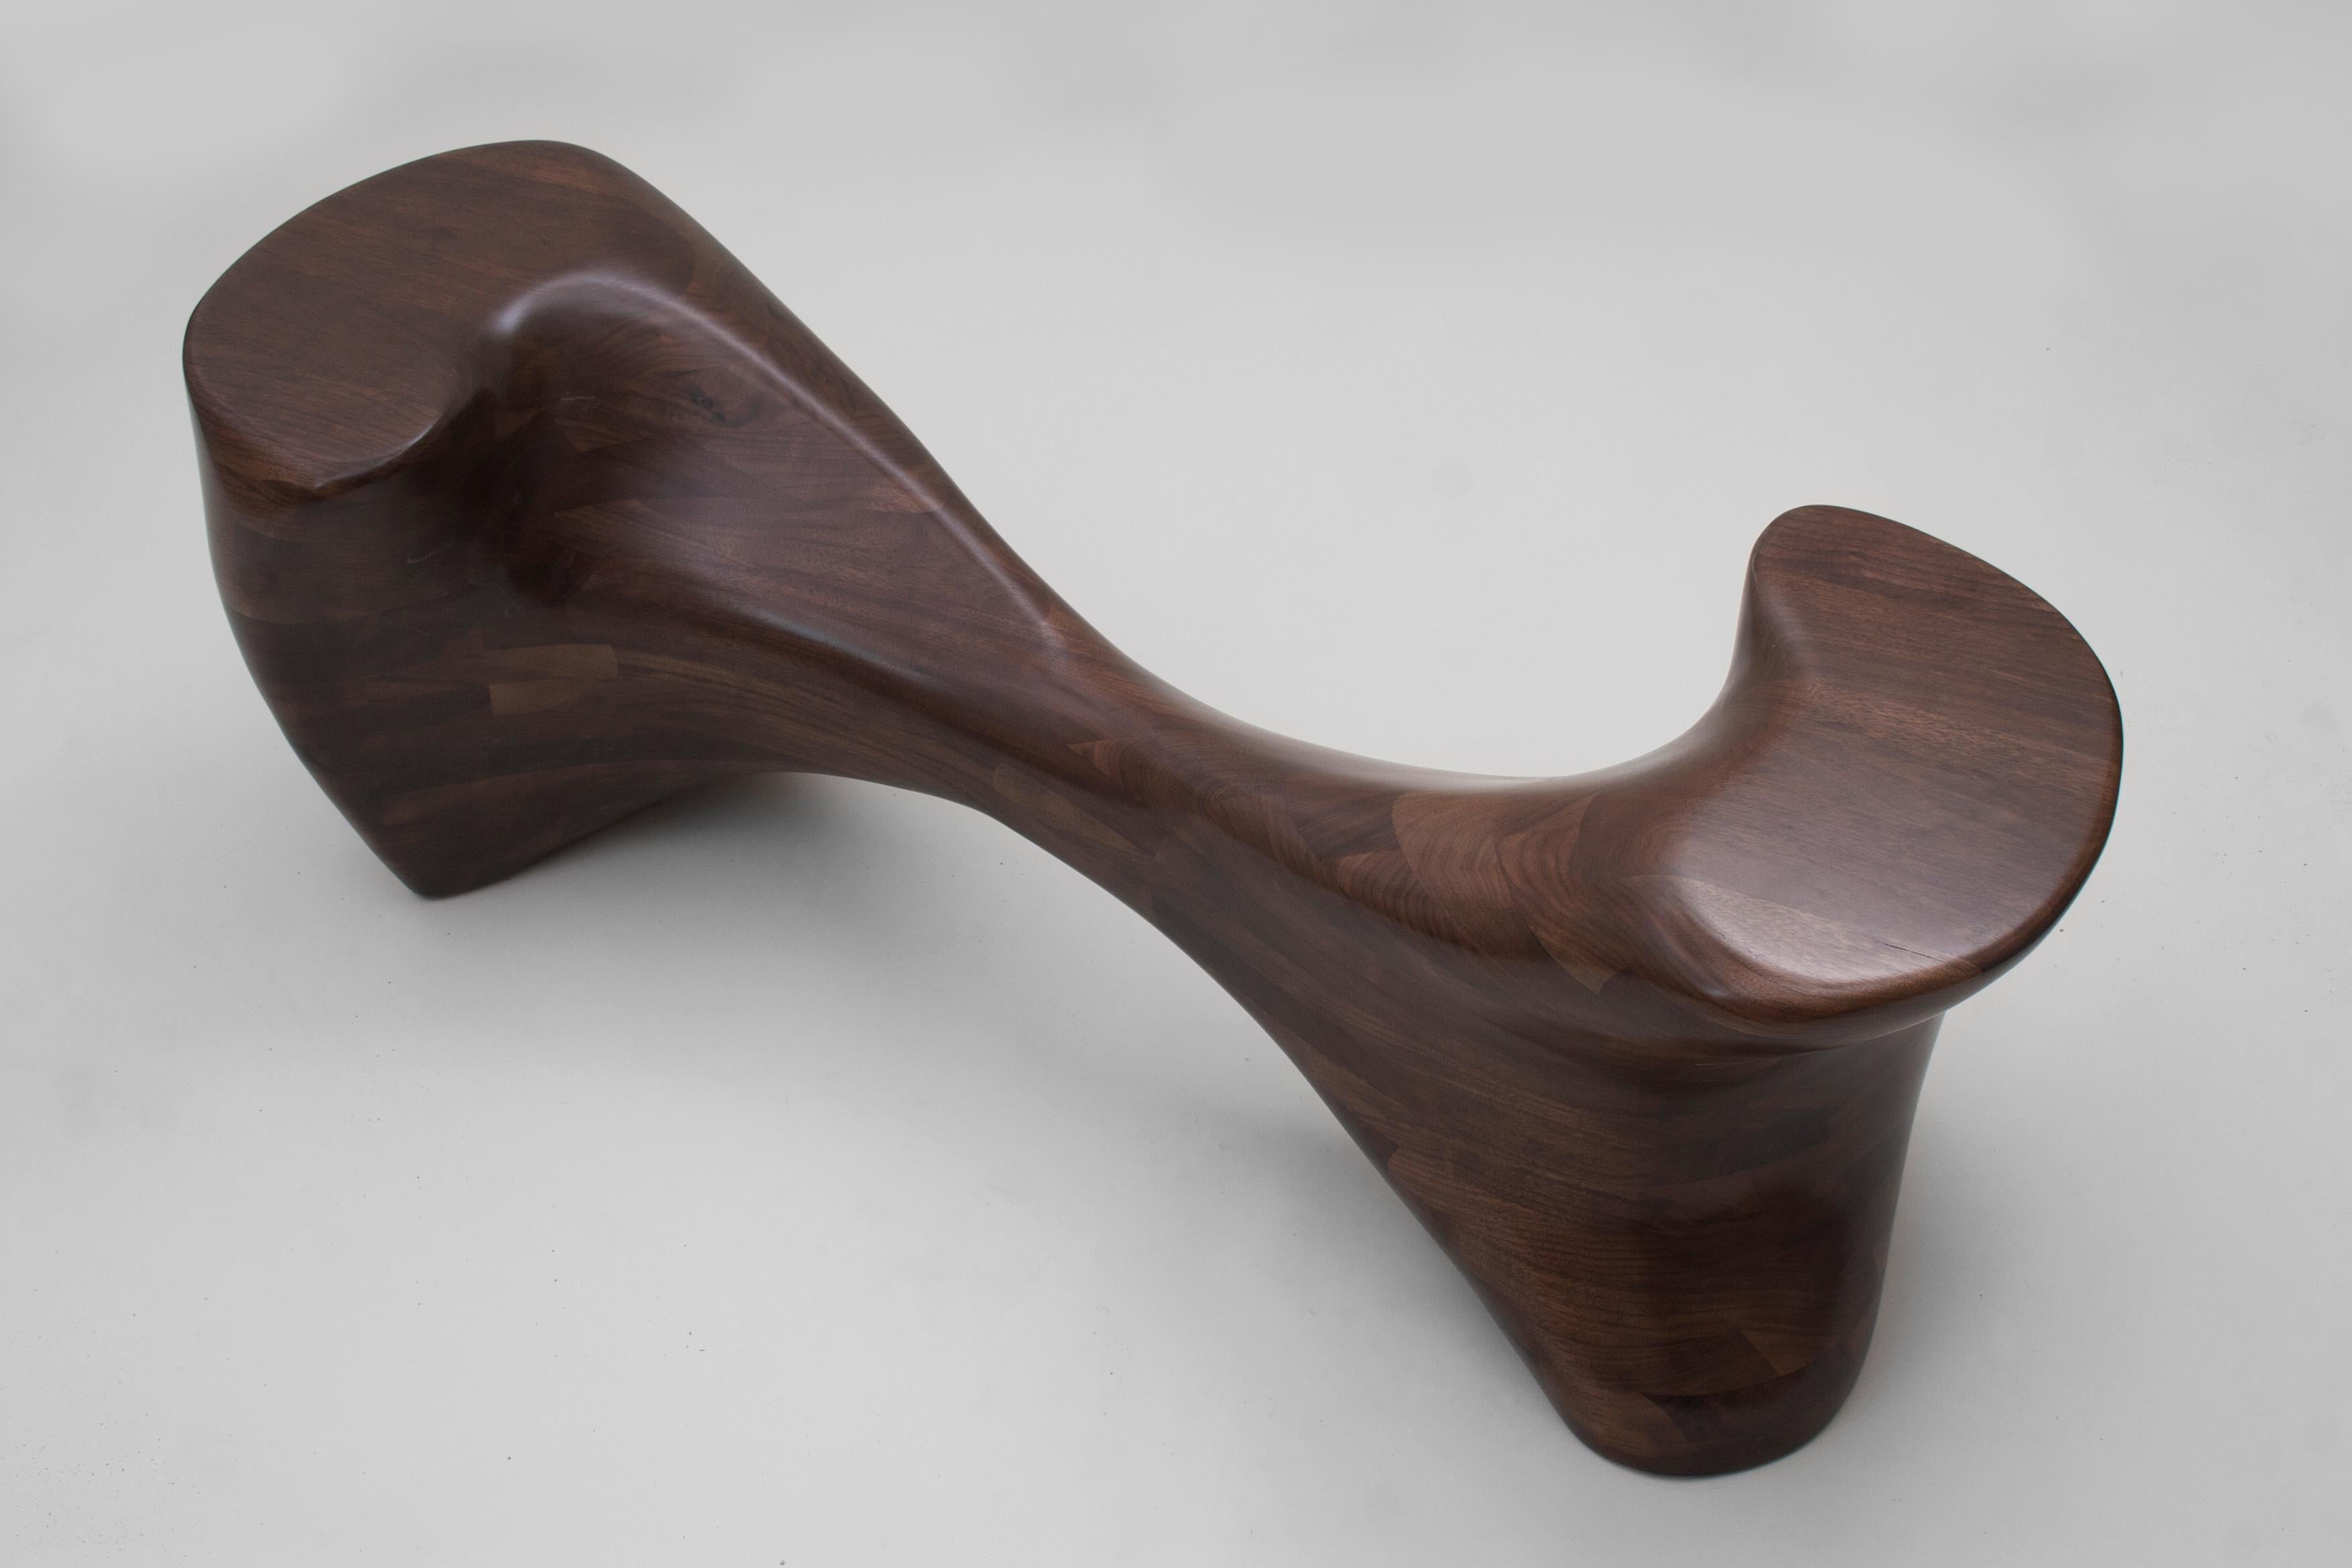 N2 TÊTE À TÊTE by Aaron Scott
Dimensions: D 43.5 x W 124.5 x H 43.5 cm
Materials: Walnut. 


Brooklyn-based designer Aaron Scott was raised in the mountains and forests of Southwest Oregon. He studied philosophy at the University of